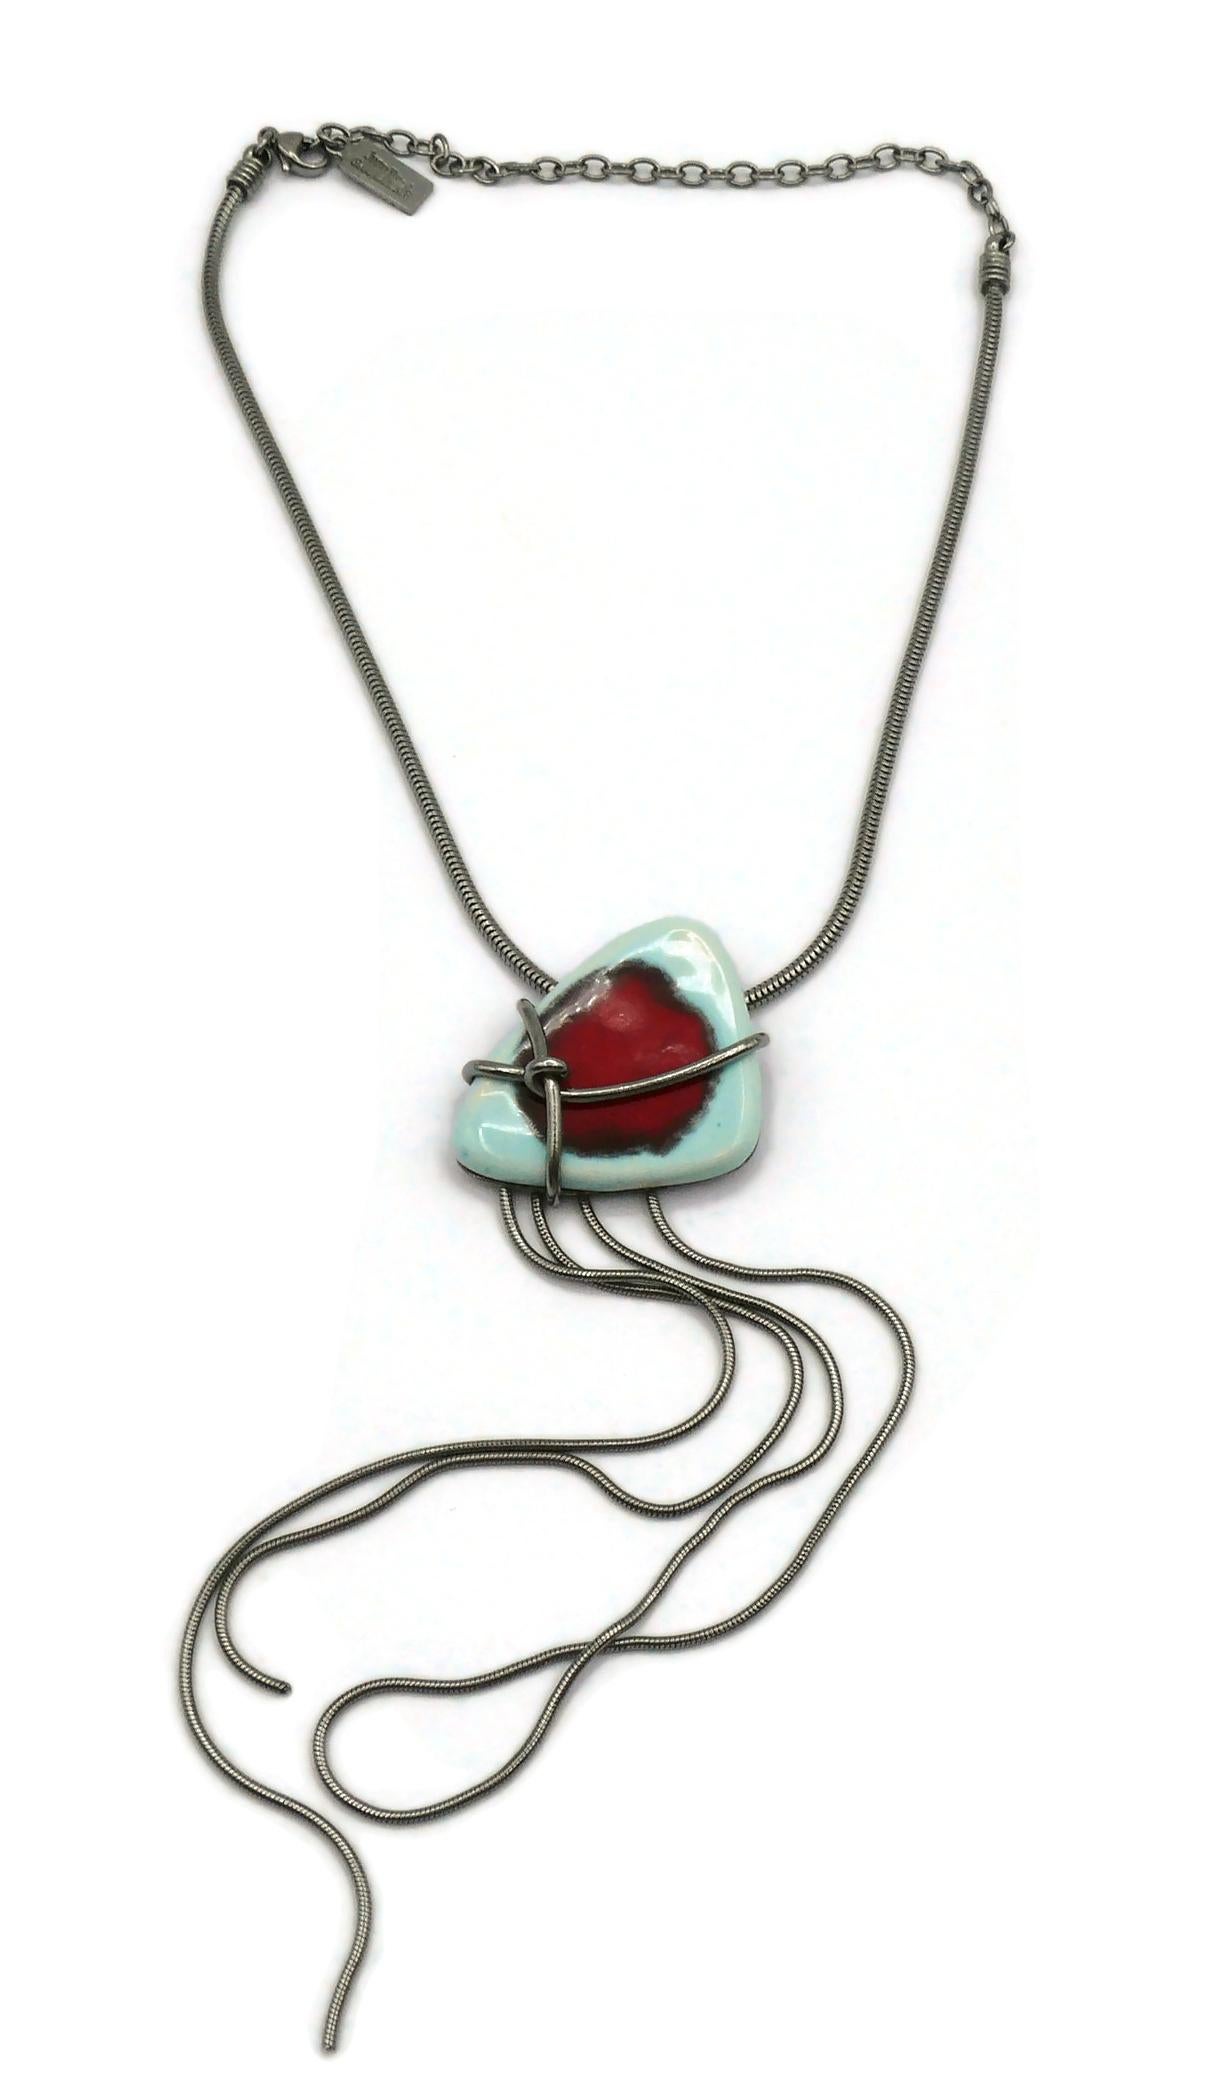 JEAN PAUL GAULTIER Modernist Pendant Necklace In Excellent Condition For Sale In Nice, FR